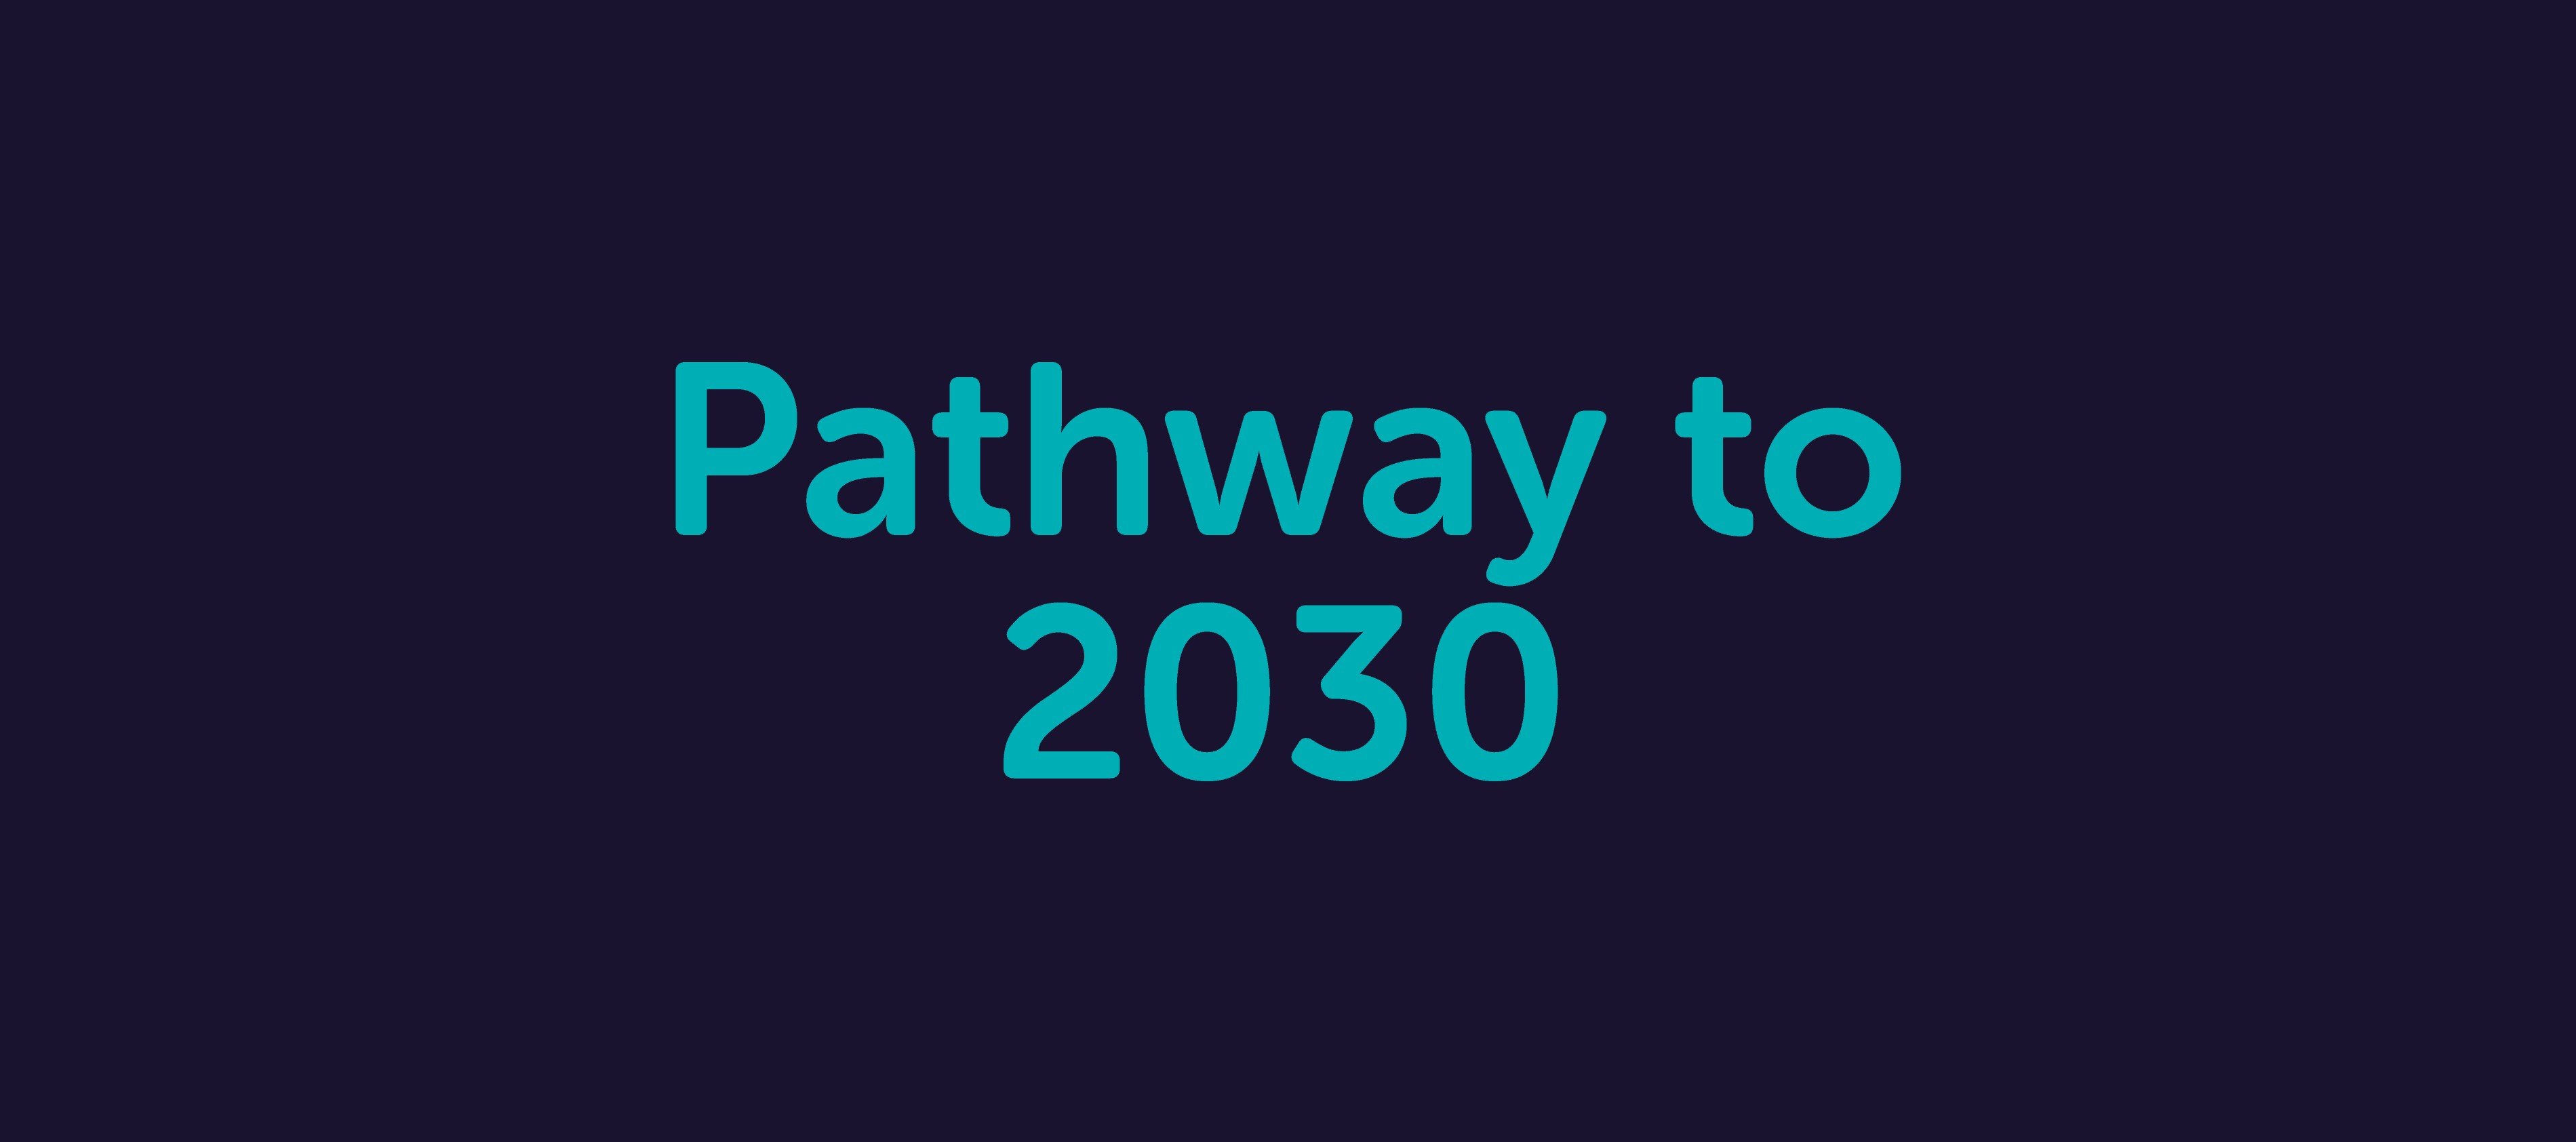 Link to Pathway to 2030 web page